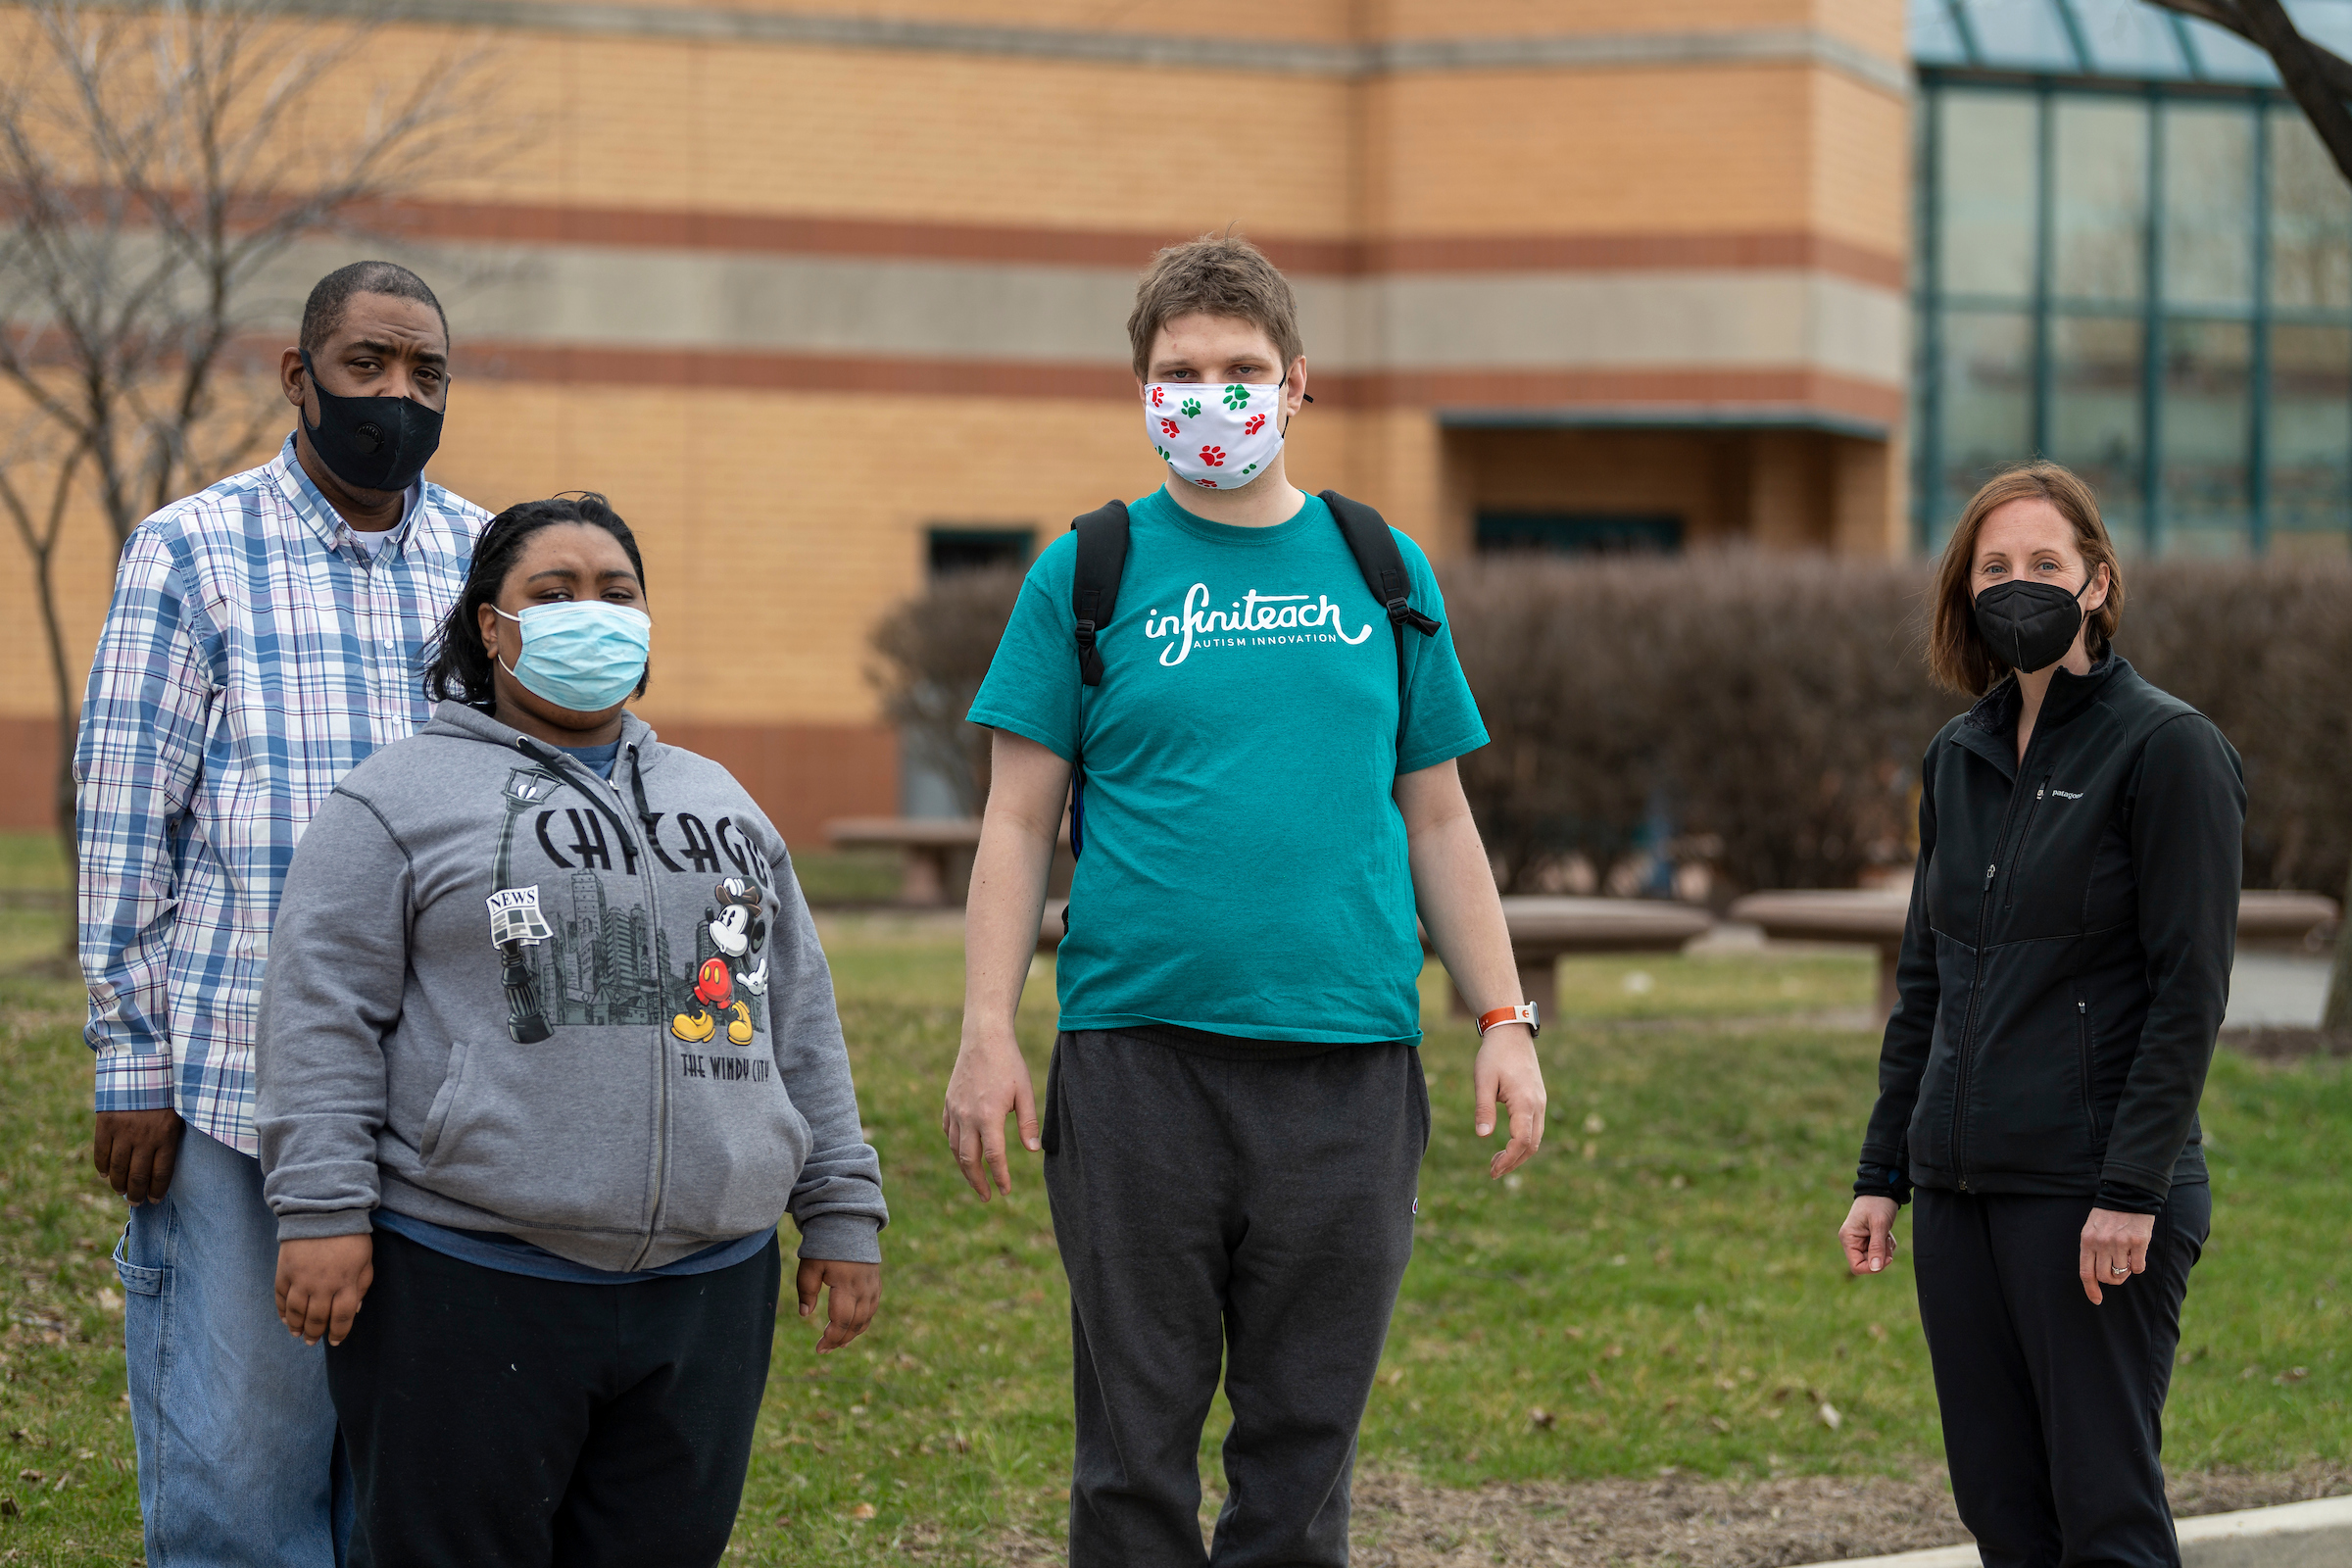 Four people wearing masks waiting to get a COVID-19 vaccine